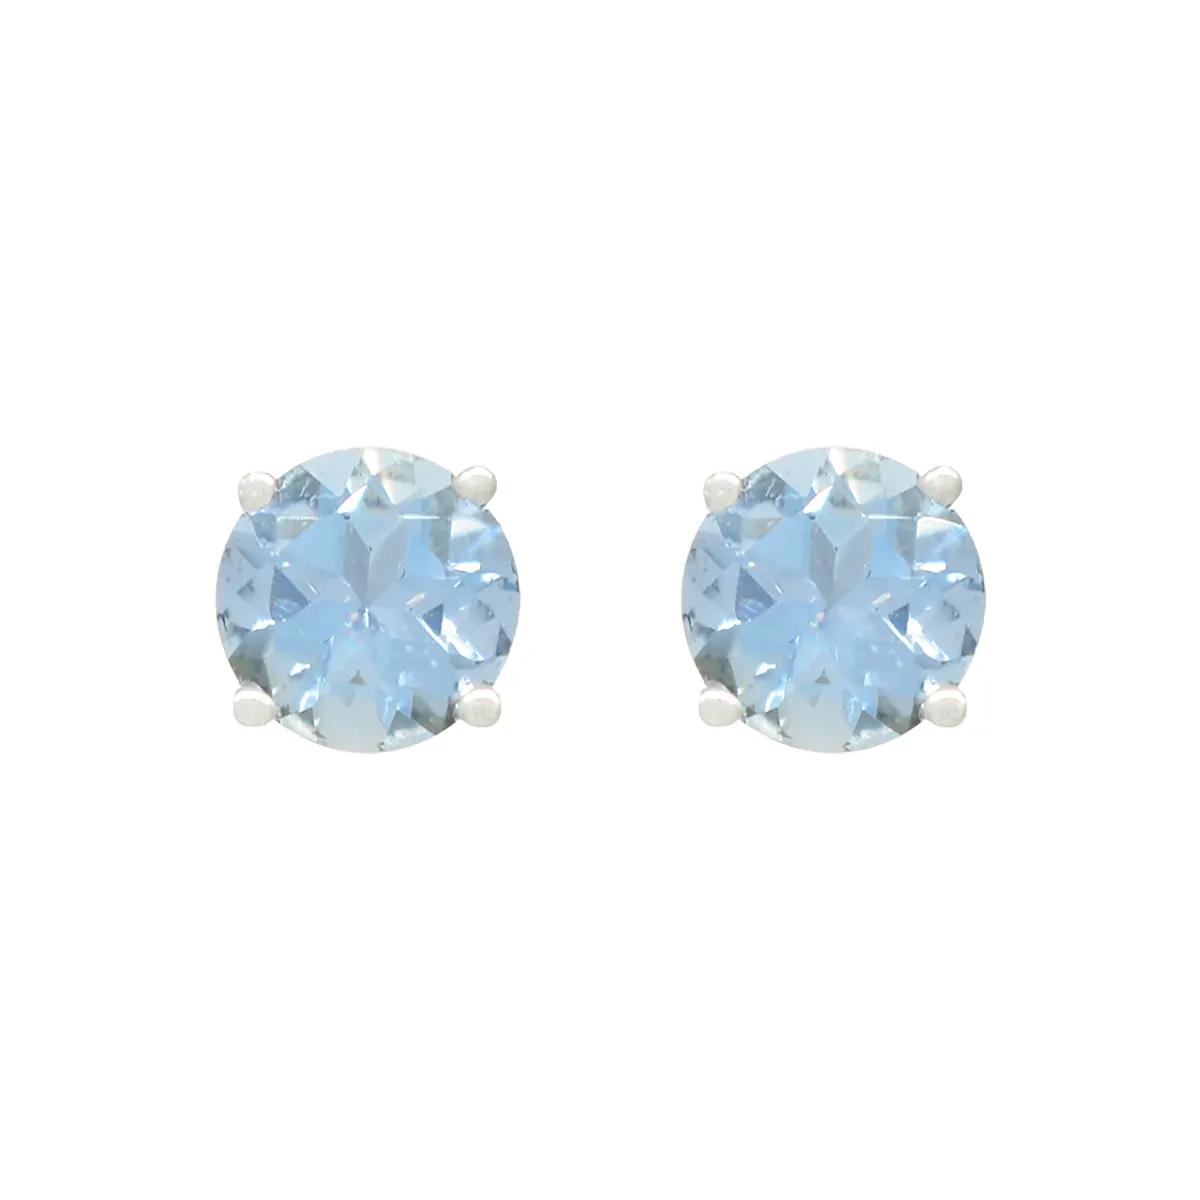 Aquamarine stud earrings in 18K white gold with 2 round cut genuine natural aquamarines in 0.84 Ct. total weight